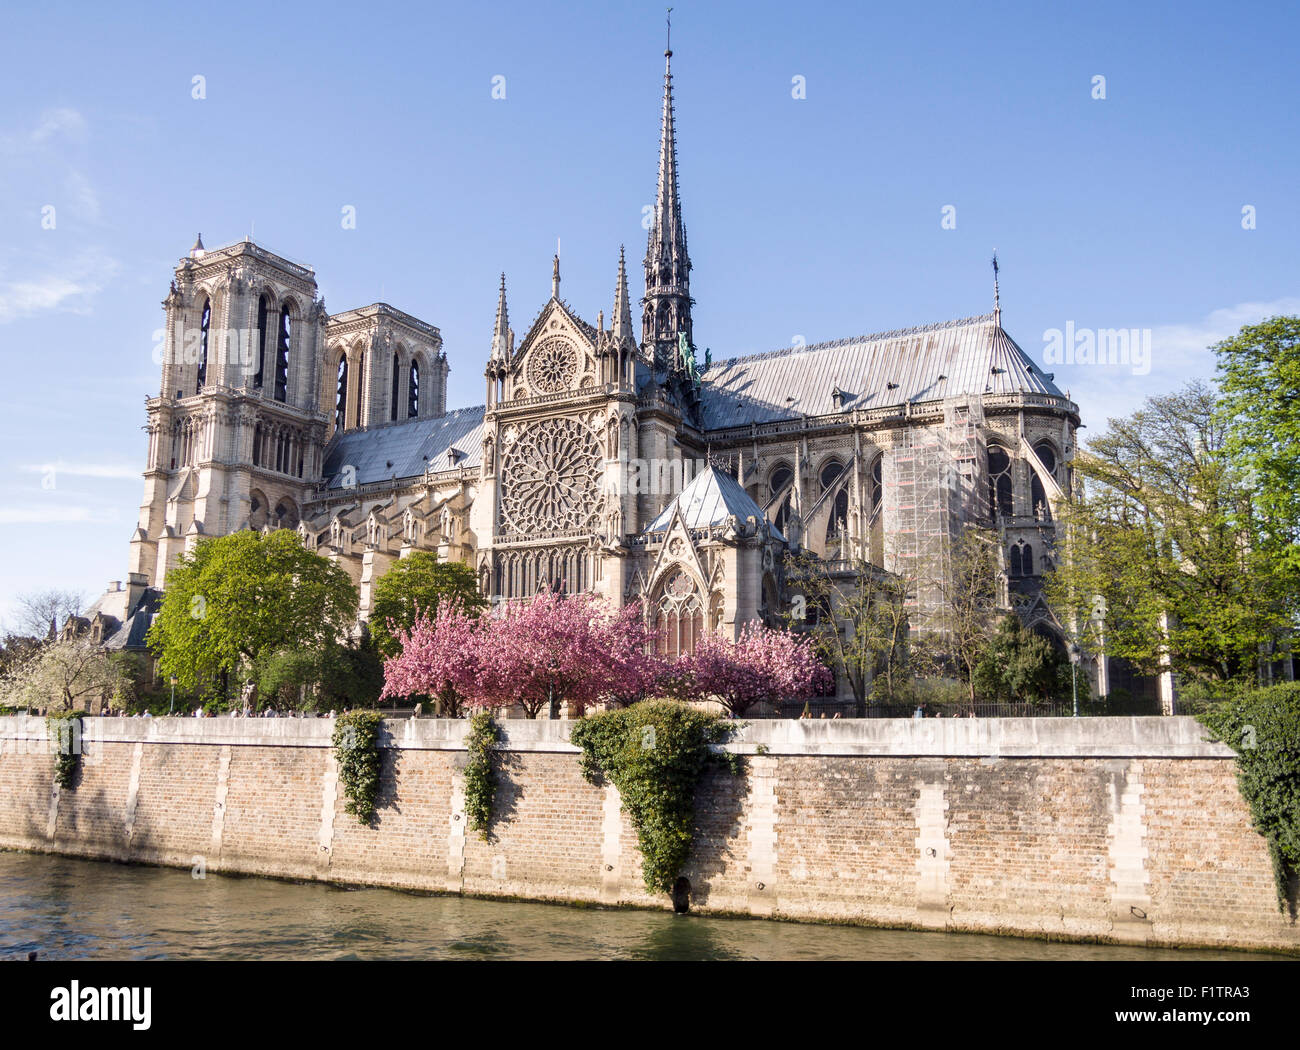 Notre-Dame Cathedral from Across the Seine. The walled river forms a base for this view of the famous cathedral's west facade. F Stock Photo